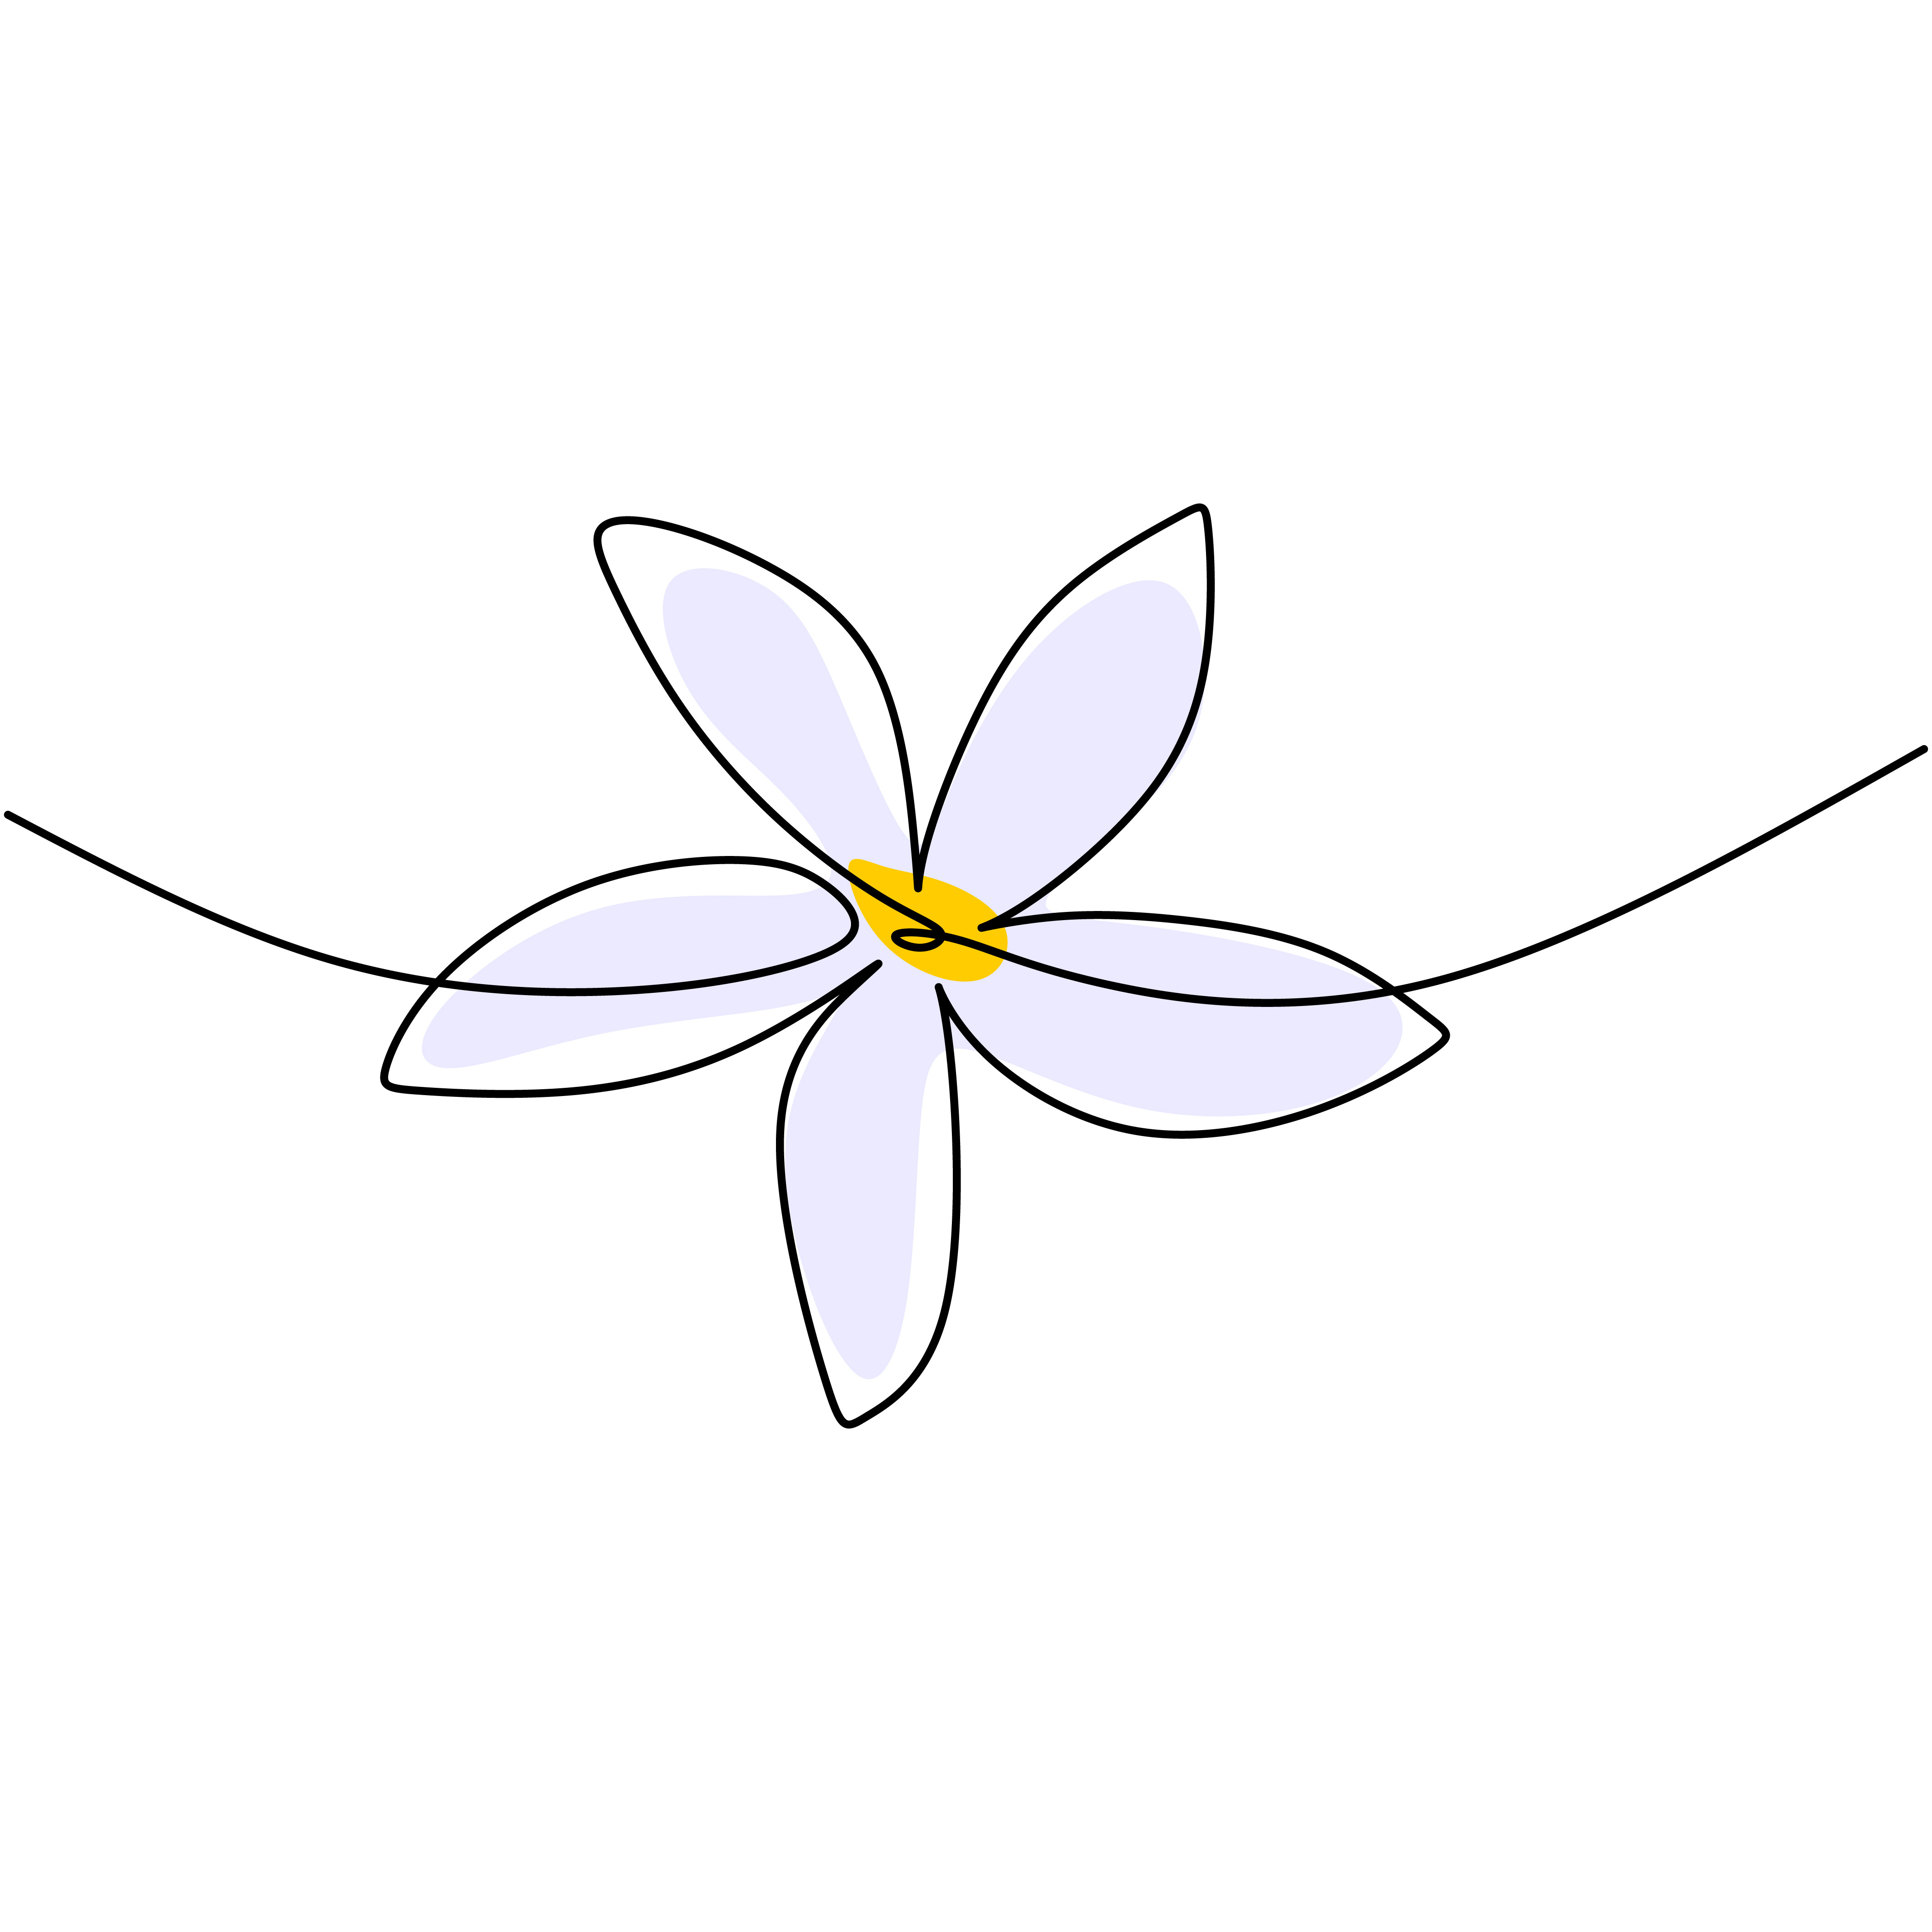 beautiful-flower-in-minimal-line-style-continuous-single-line-drawing-of-flower-hand-drawn-picture-silhouette-branch-with-flowers-isolated-on-white-background-illustration-vector.jpg